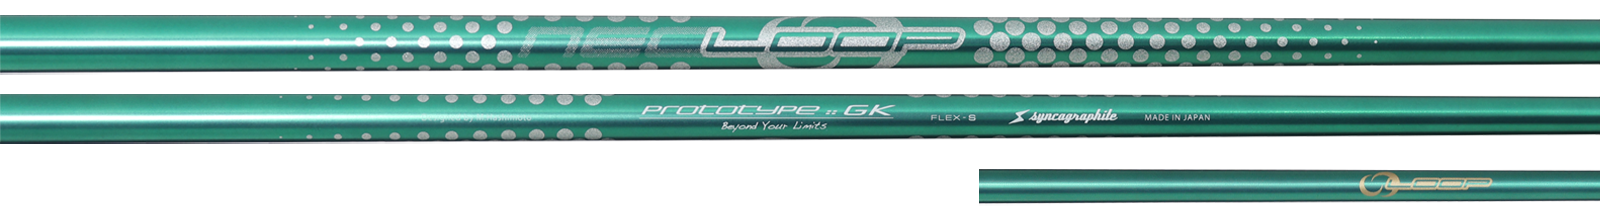 LOOP SHAFT :: for Driver | syncagraphite inc. :: 株式会社シンカ